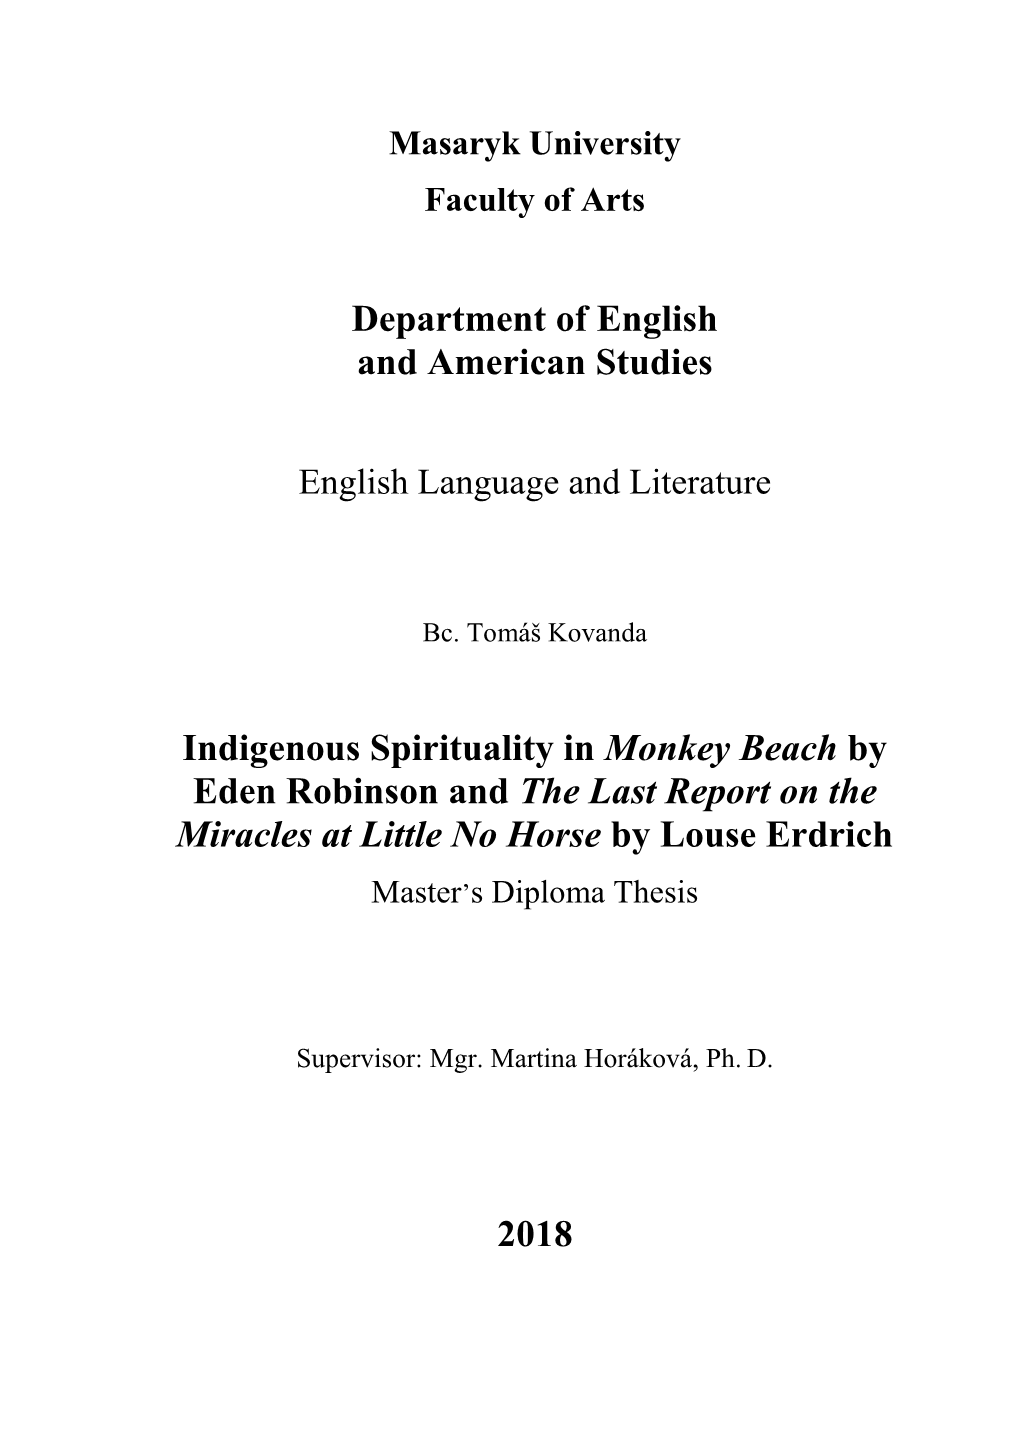 Department of English and American Studies Indigenous Spirituality In